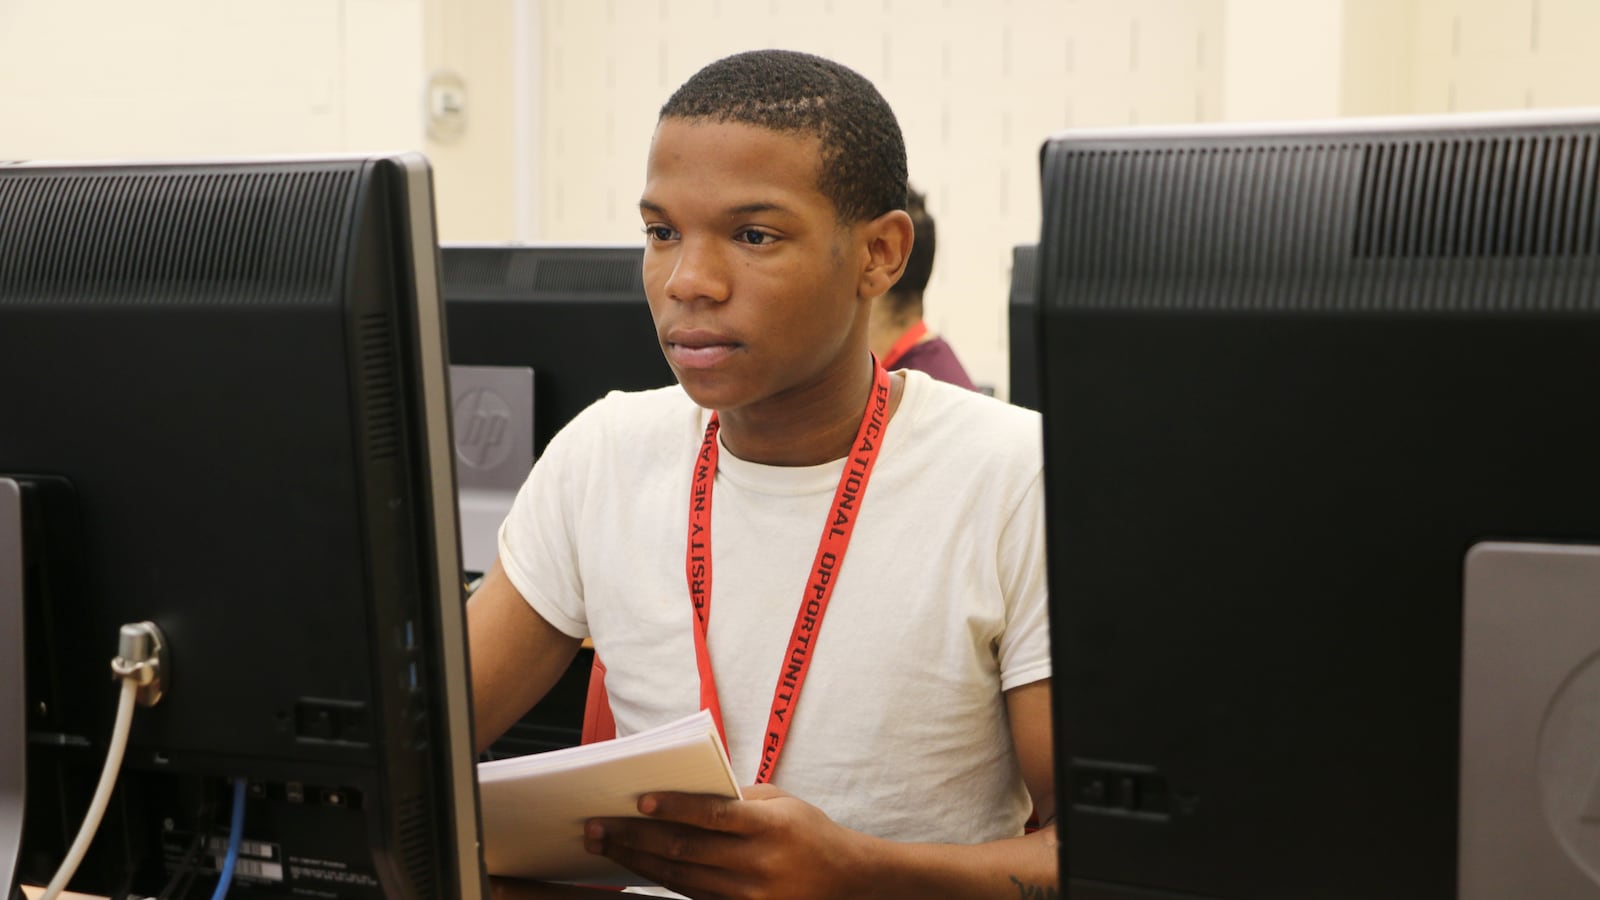 Yamin Reddick in a summer math class at Rutgers University-Newark. He had to pass his summer classes in order to begin as a freshman this fall. "This is going to be on me," he said.